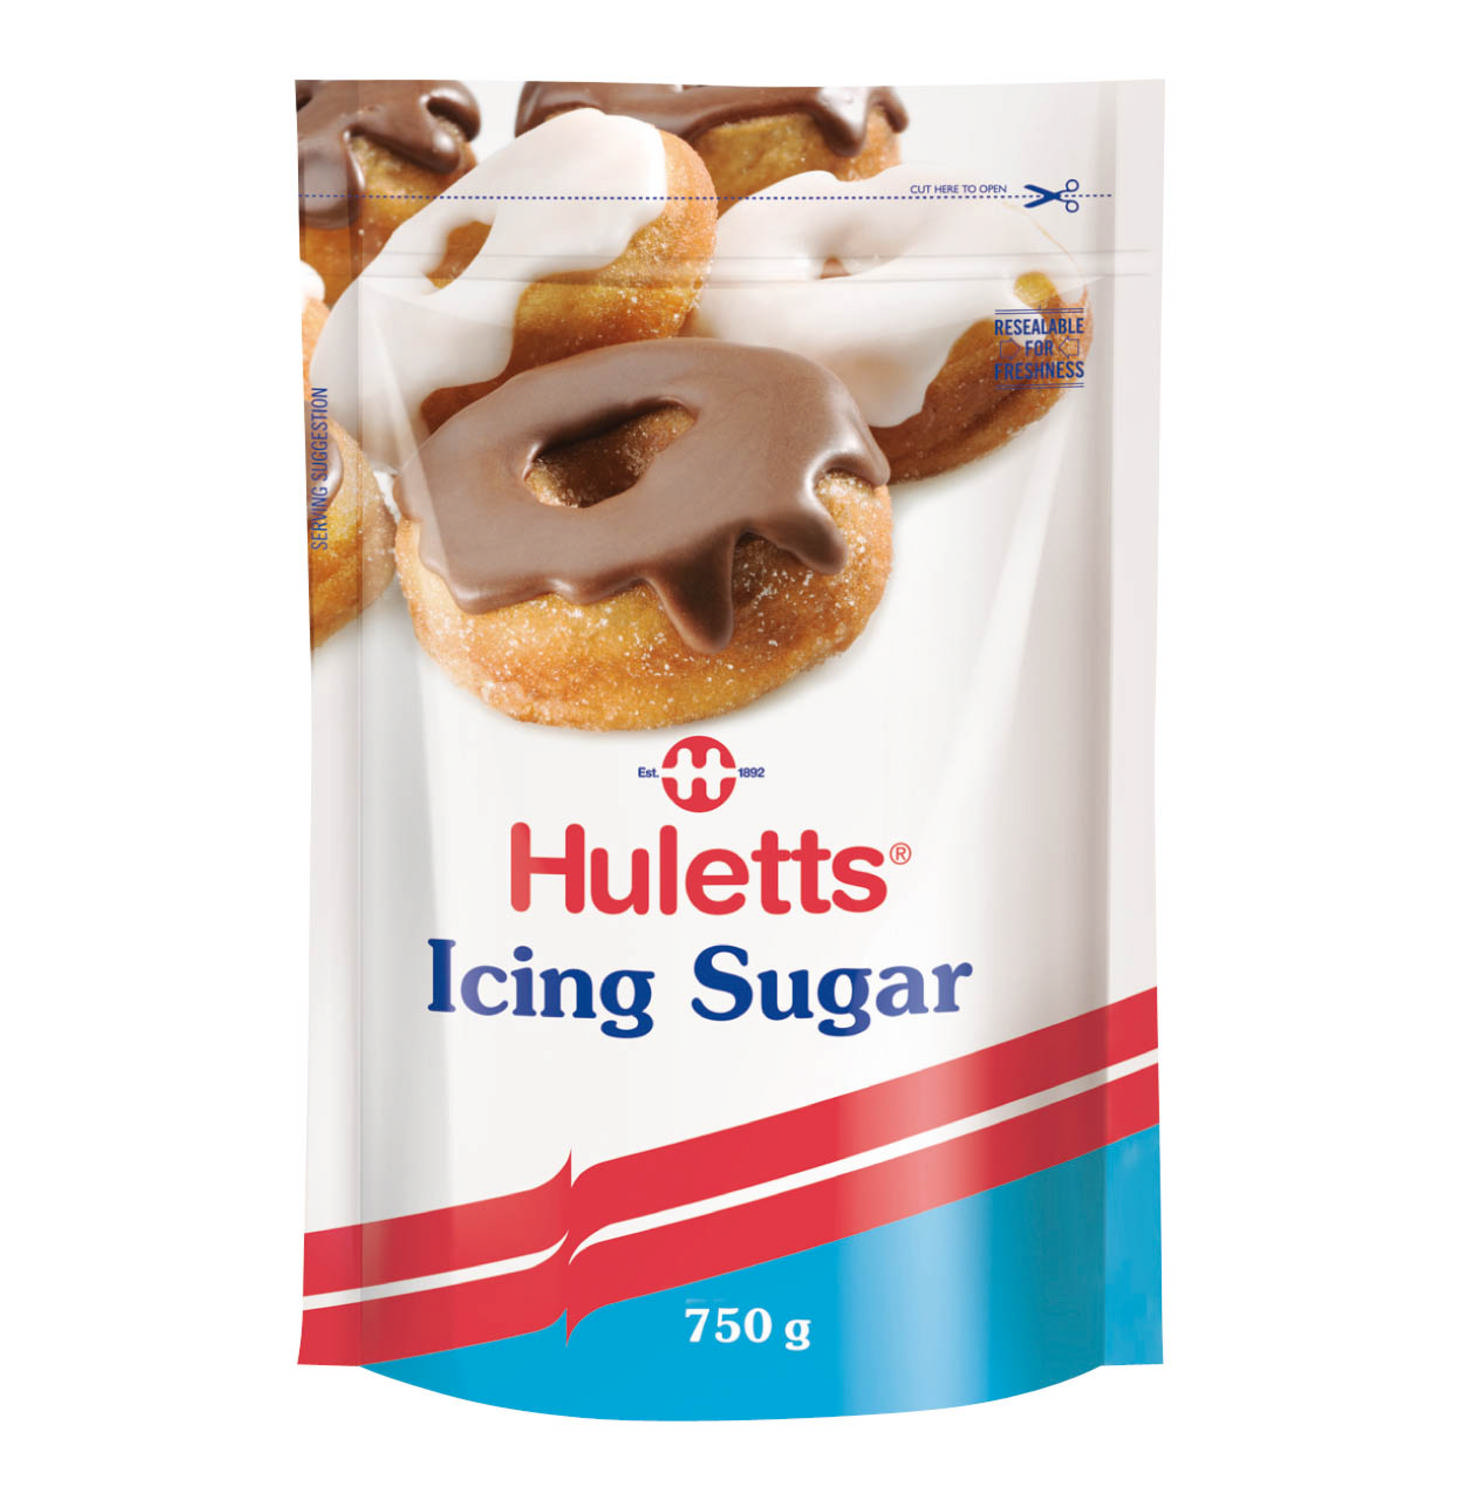 HULETTS Icing Sugar (1 x 750g) - Lowest Prices & Specials Online | Makro